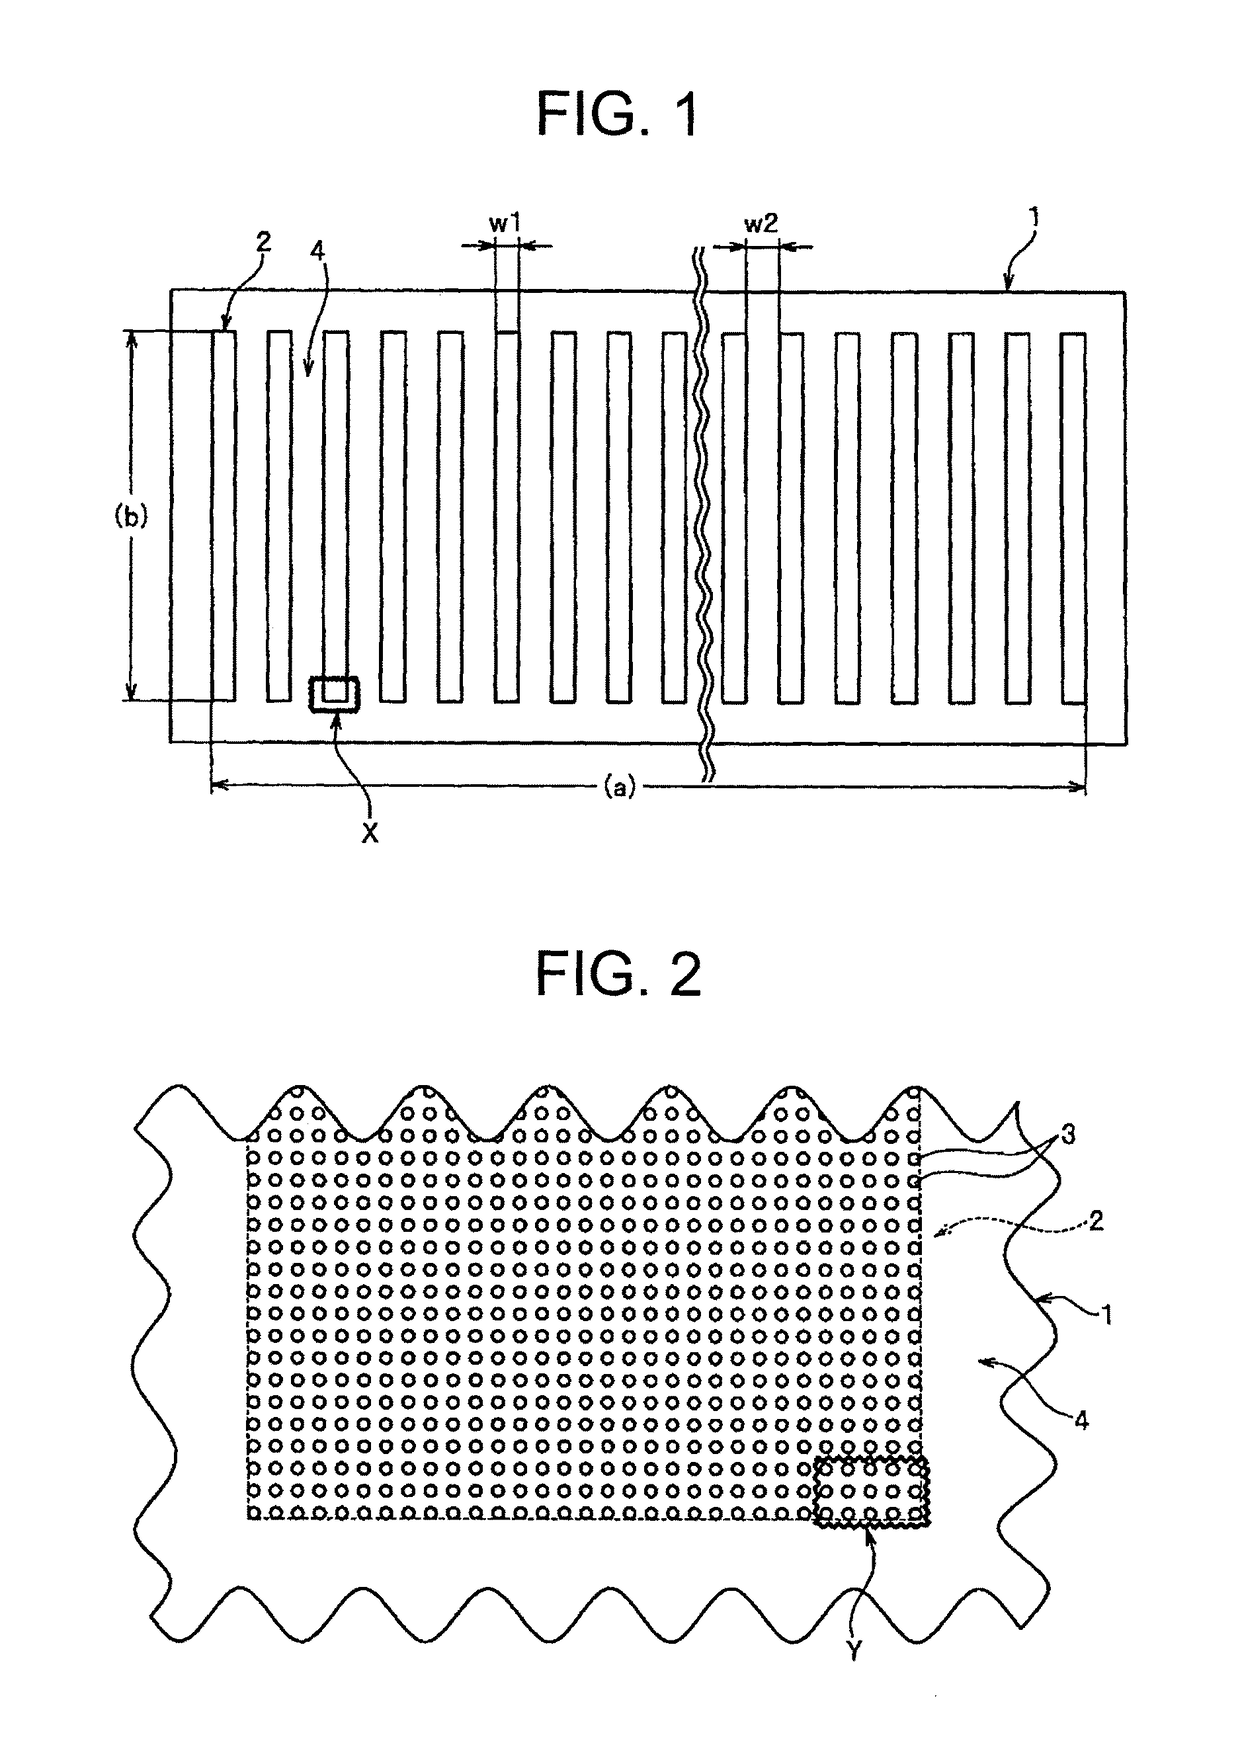 Process for producing a fibrous bundle via a spinning nozzle